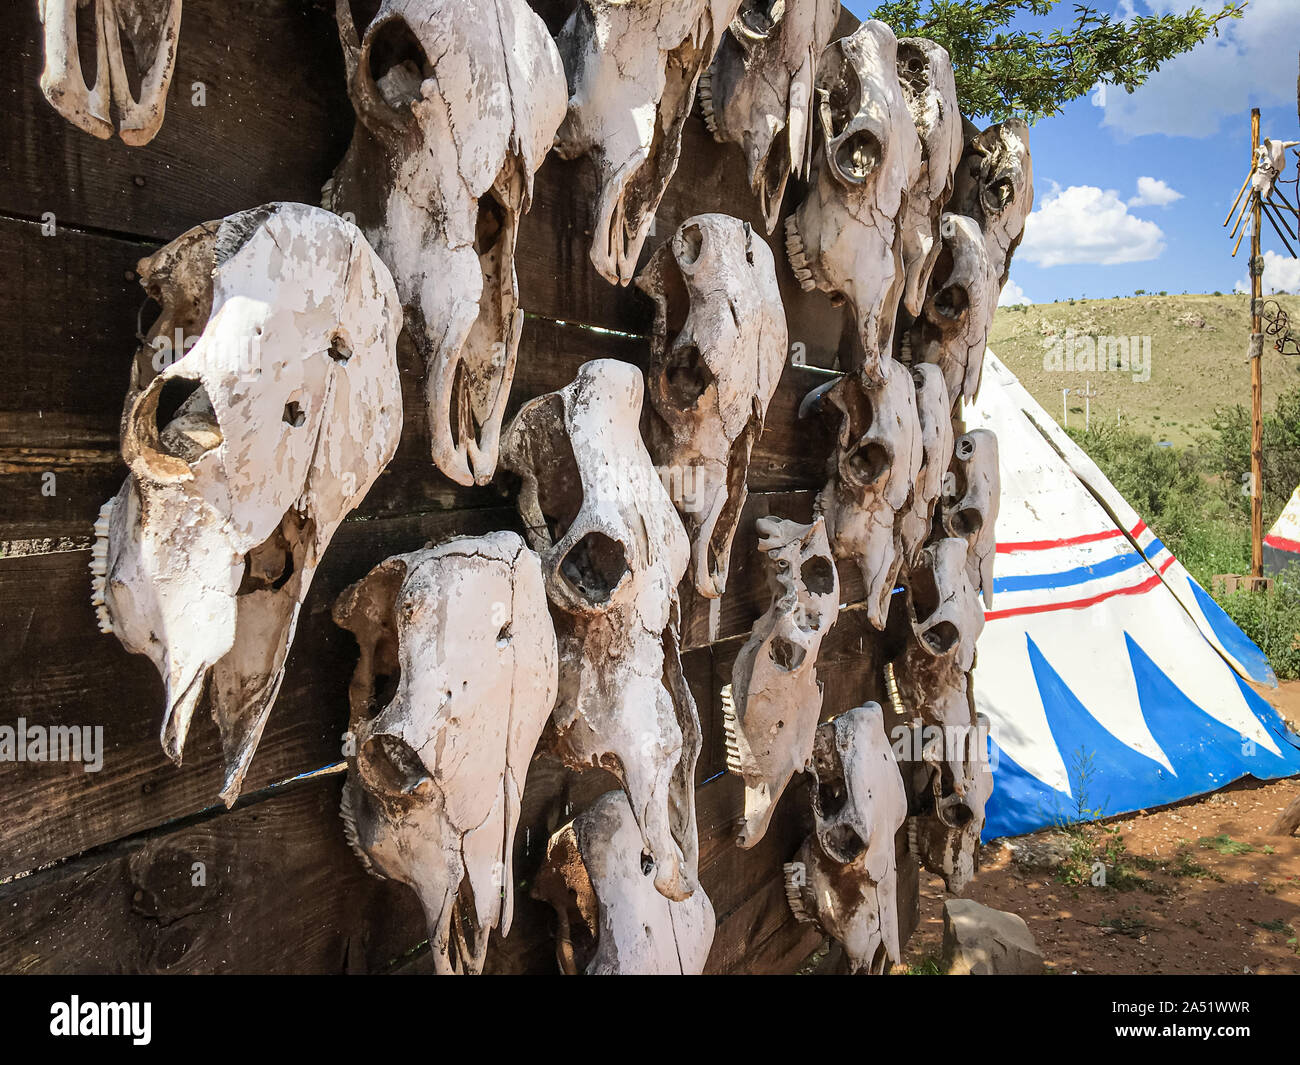 Dry cow skulls as ornament in Old West theme park in Durango Mexico. Stock Photo